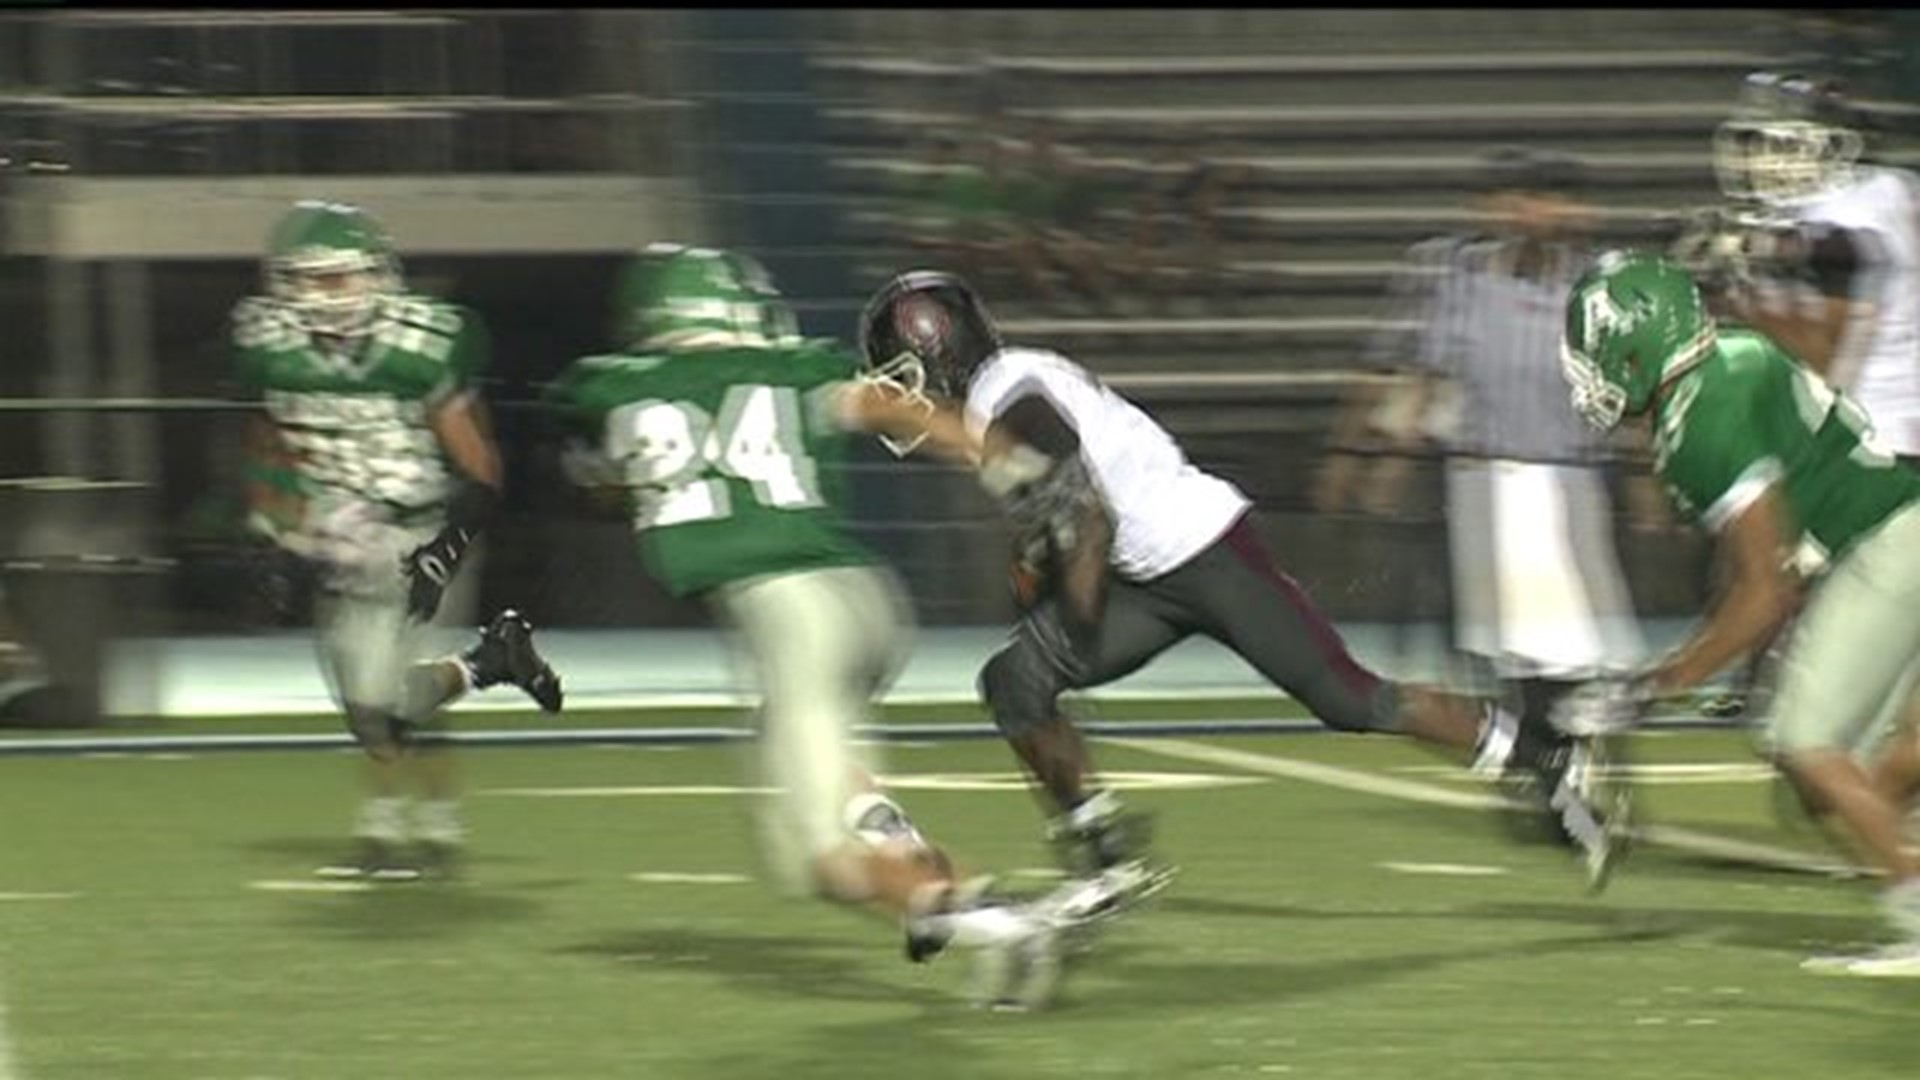 Peoria Central Bests Alleman For 2nd Straight Season